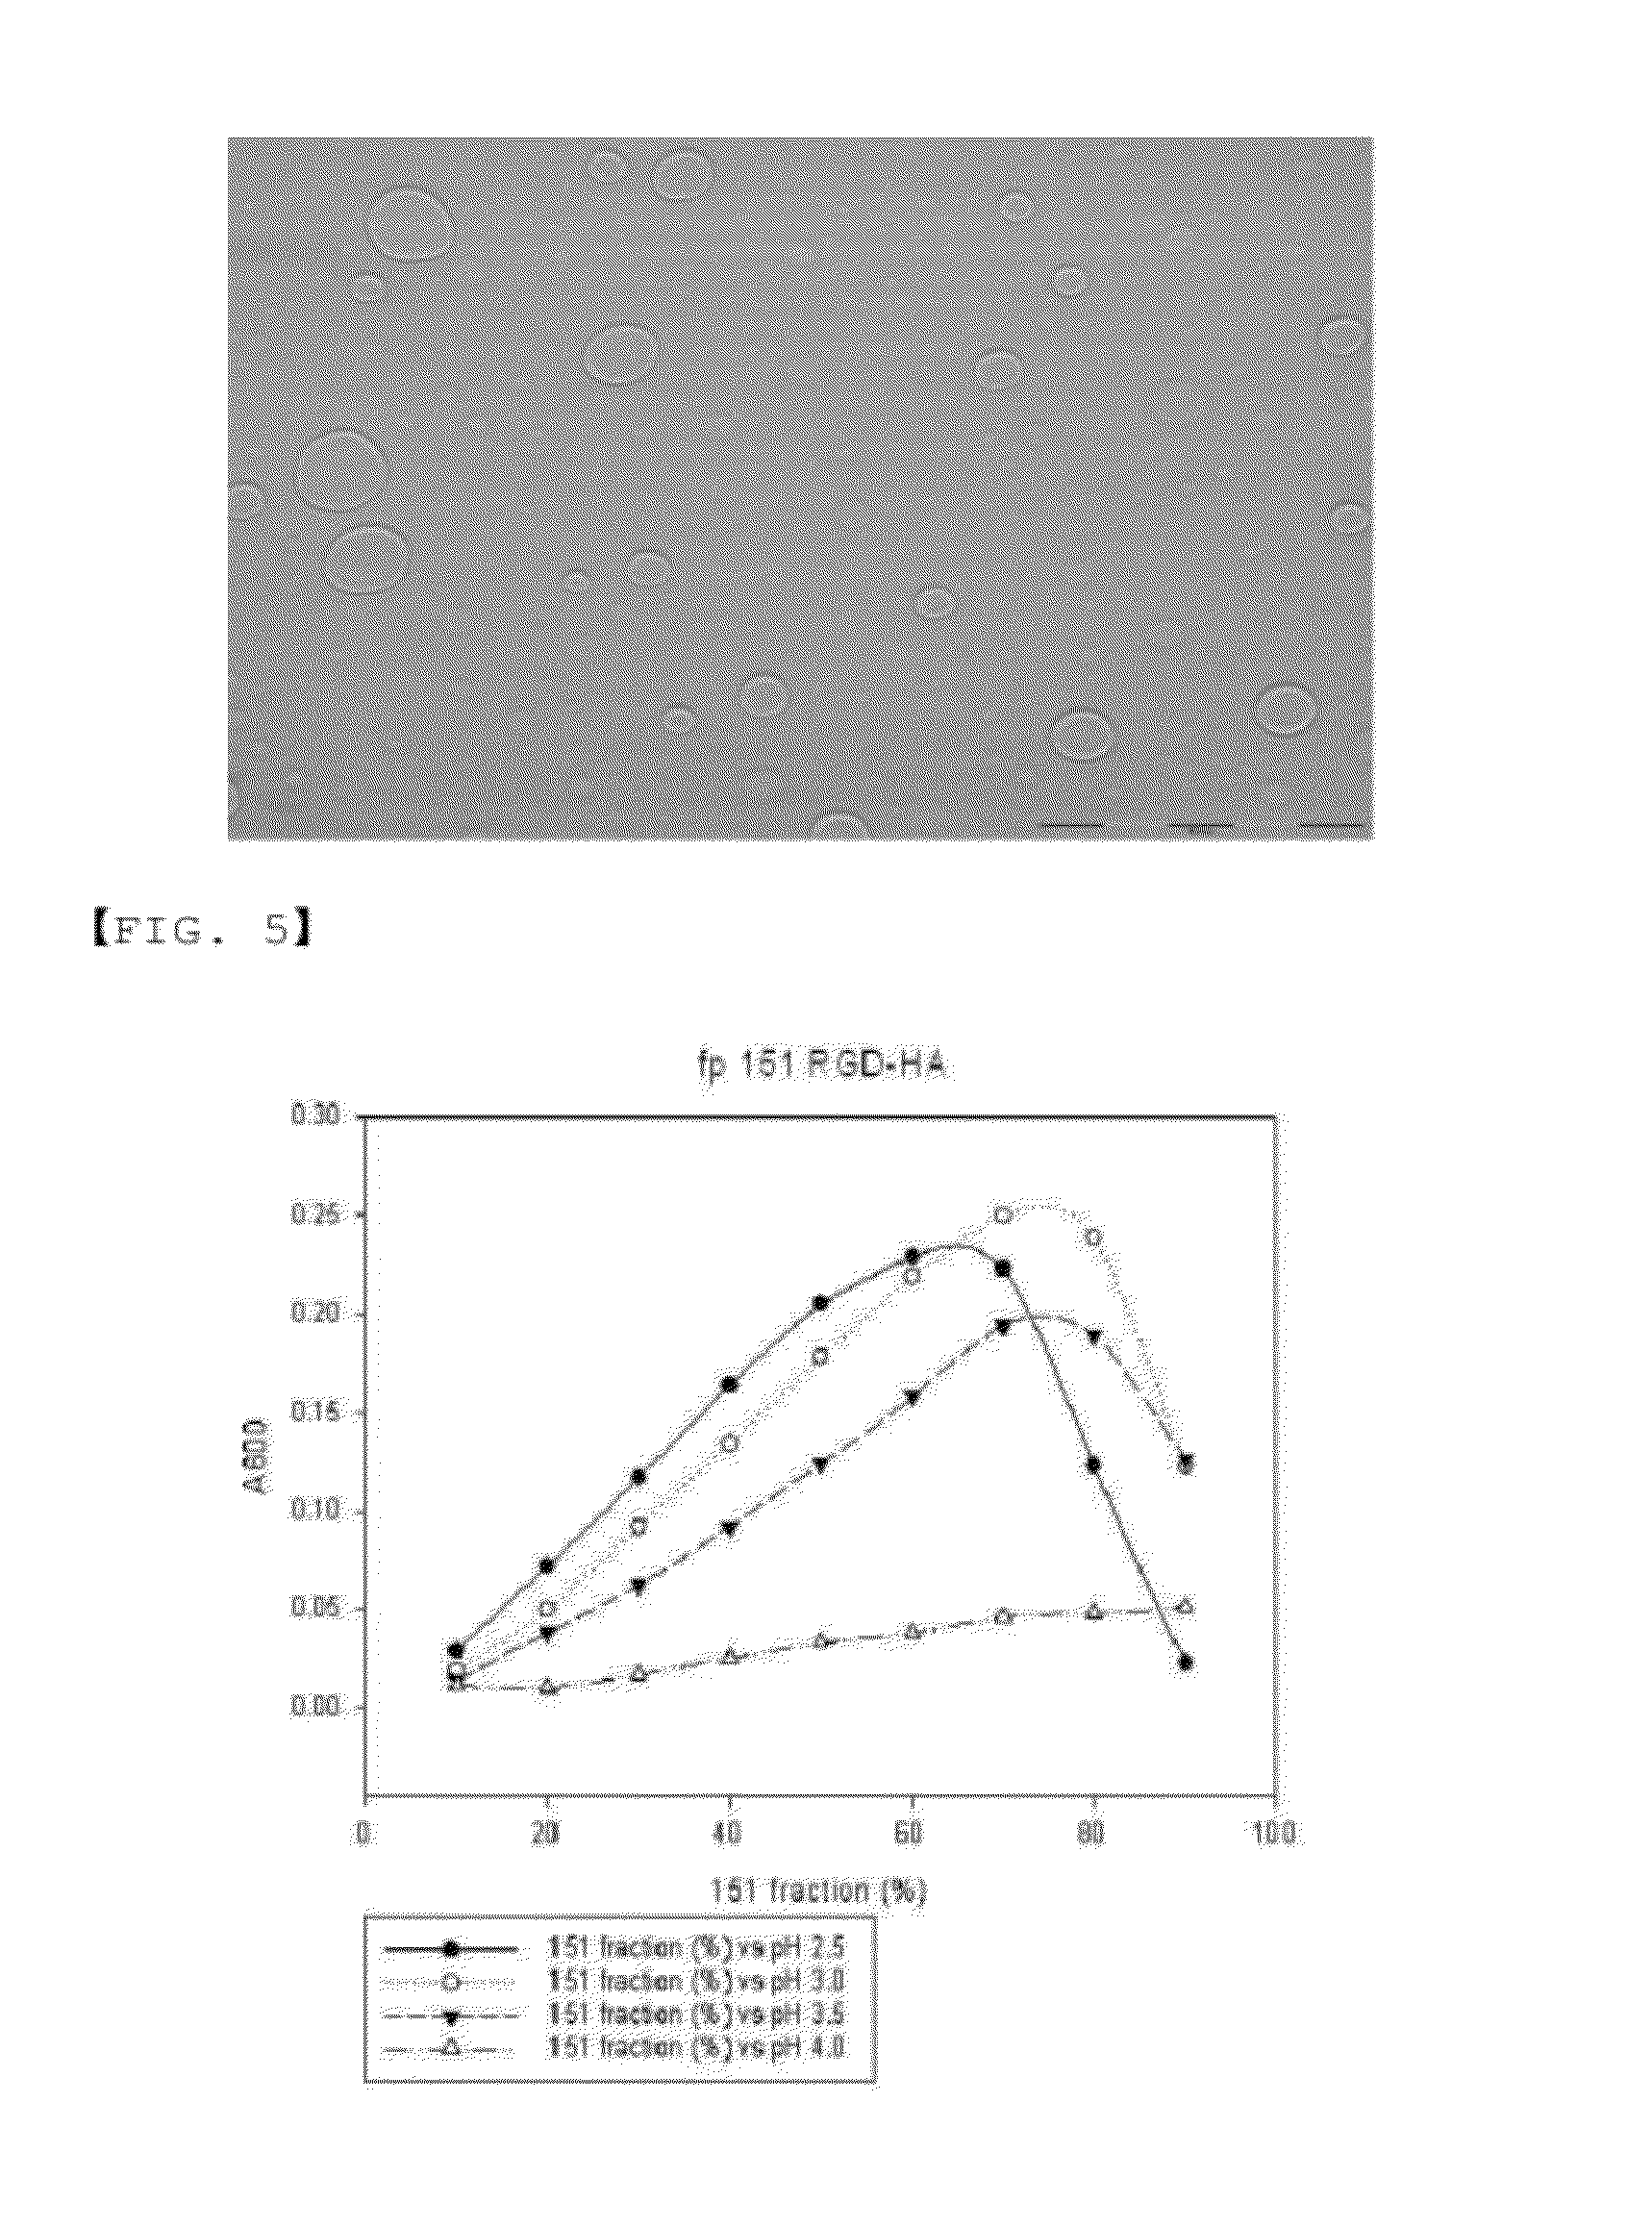 Coacervate having an ionic polymer mixed with the adhesive protein of a mussel or of a species of the variome thereof